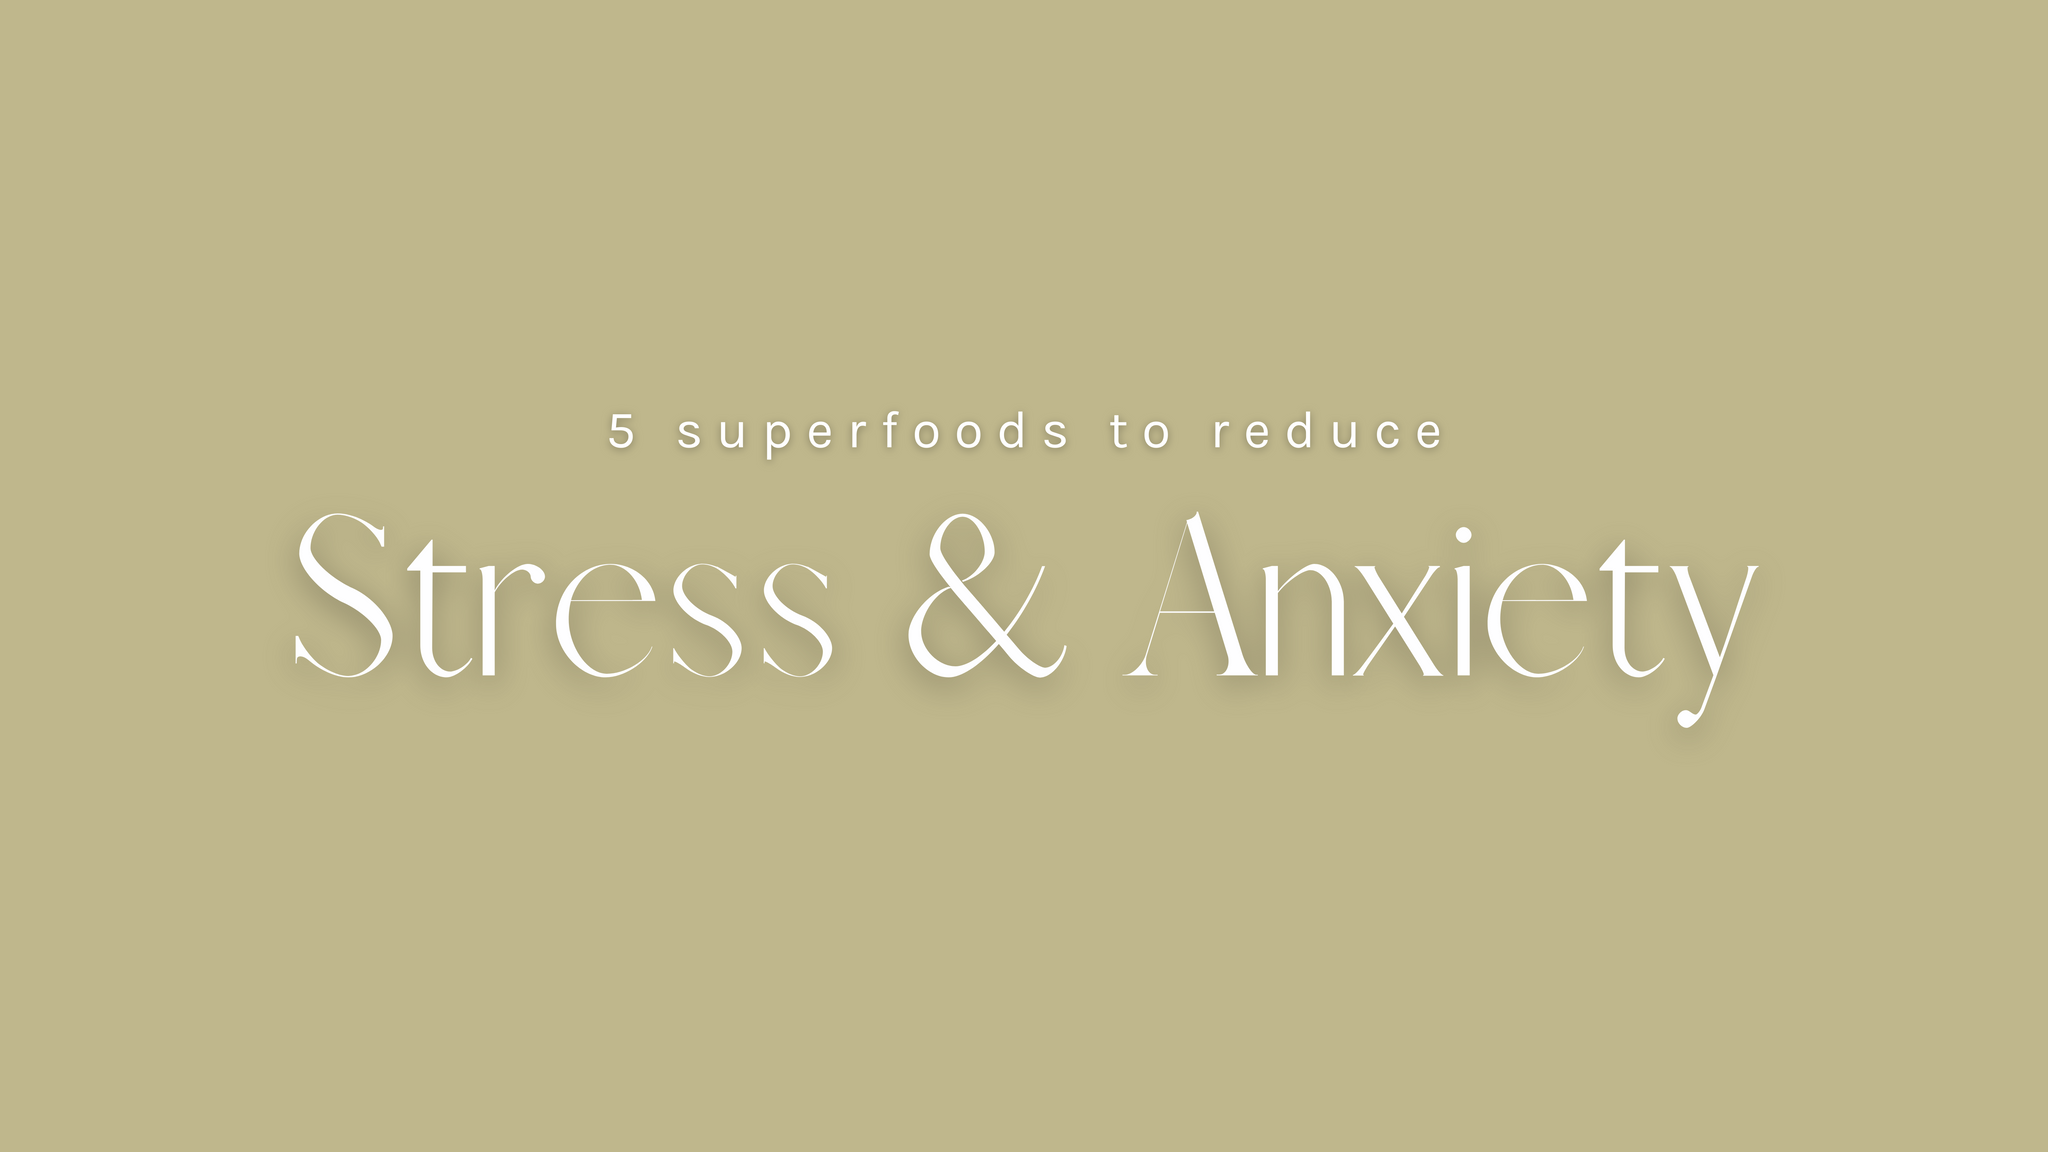 5 Superfoods To Reduce Stress & Anxiety